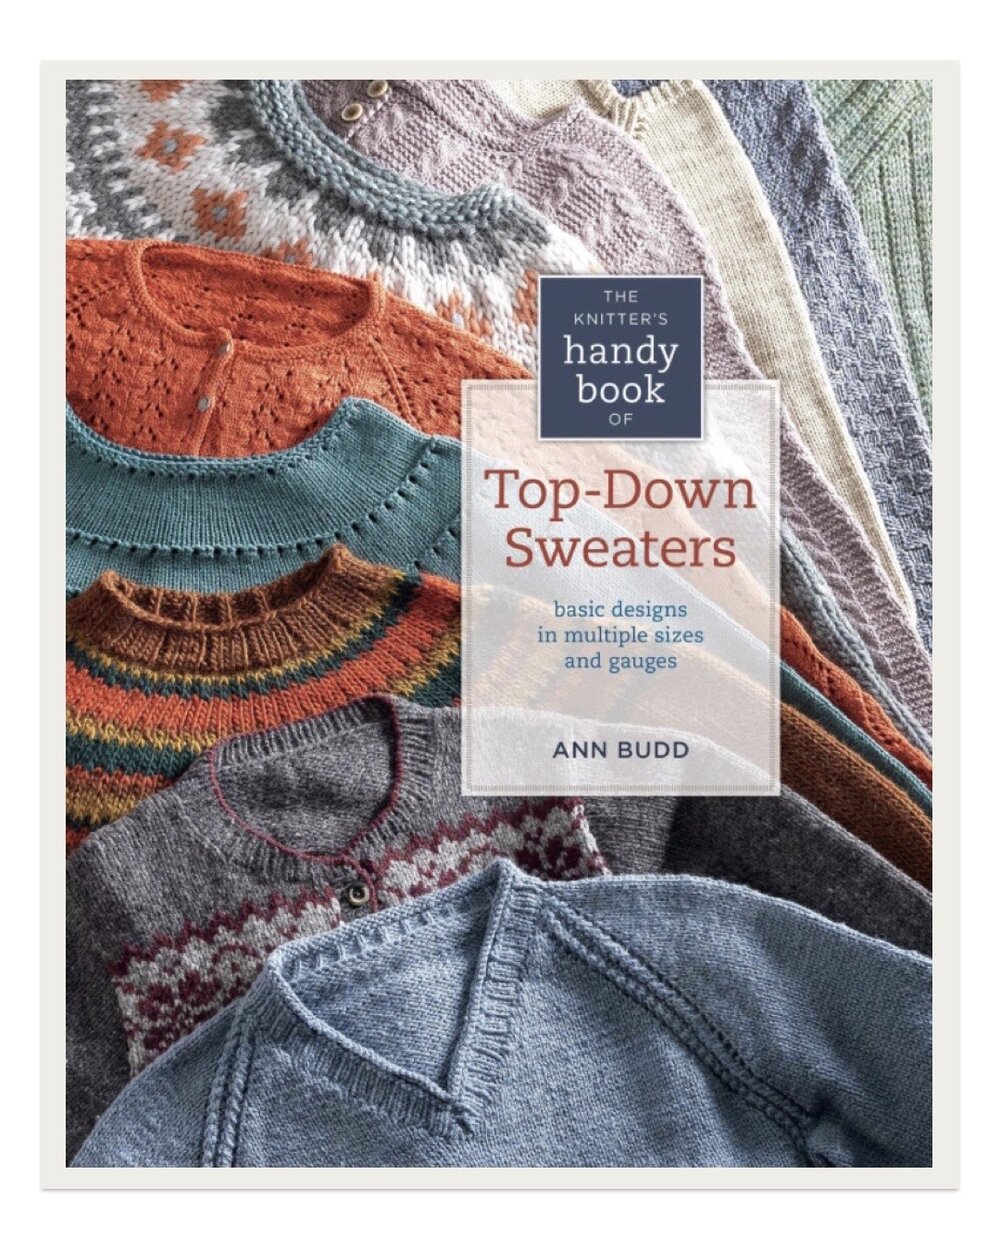 This is the book that taught me how to design a top down raglan sweater! The easy to follow charts written for multiple sizes and yarn gauges will have your imagination running wild with design ideas for top down raglans and yoke sweaters.